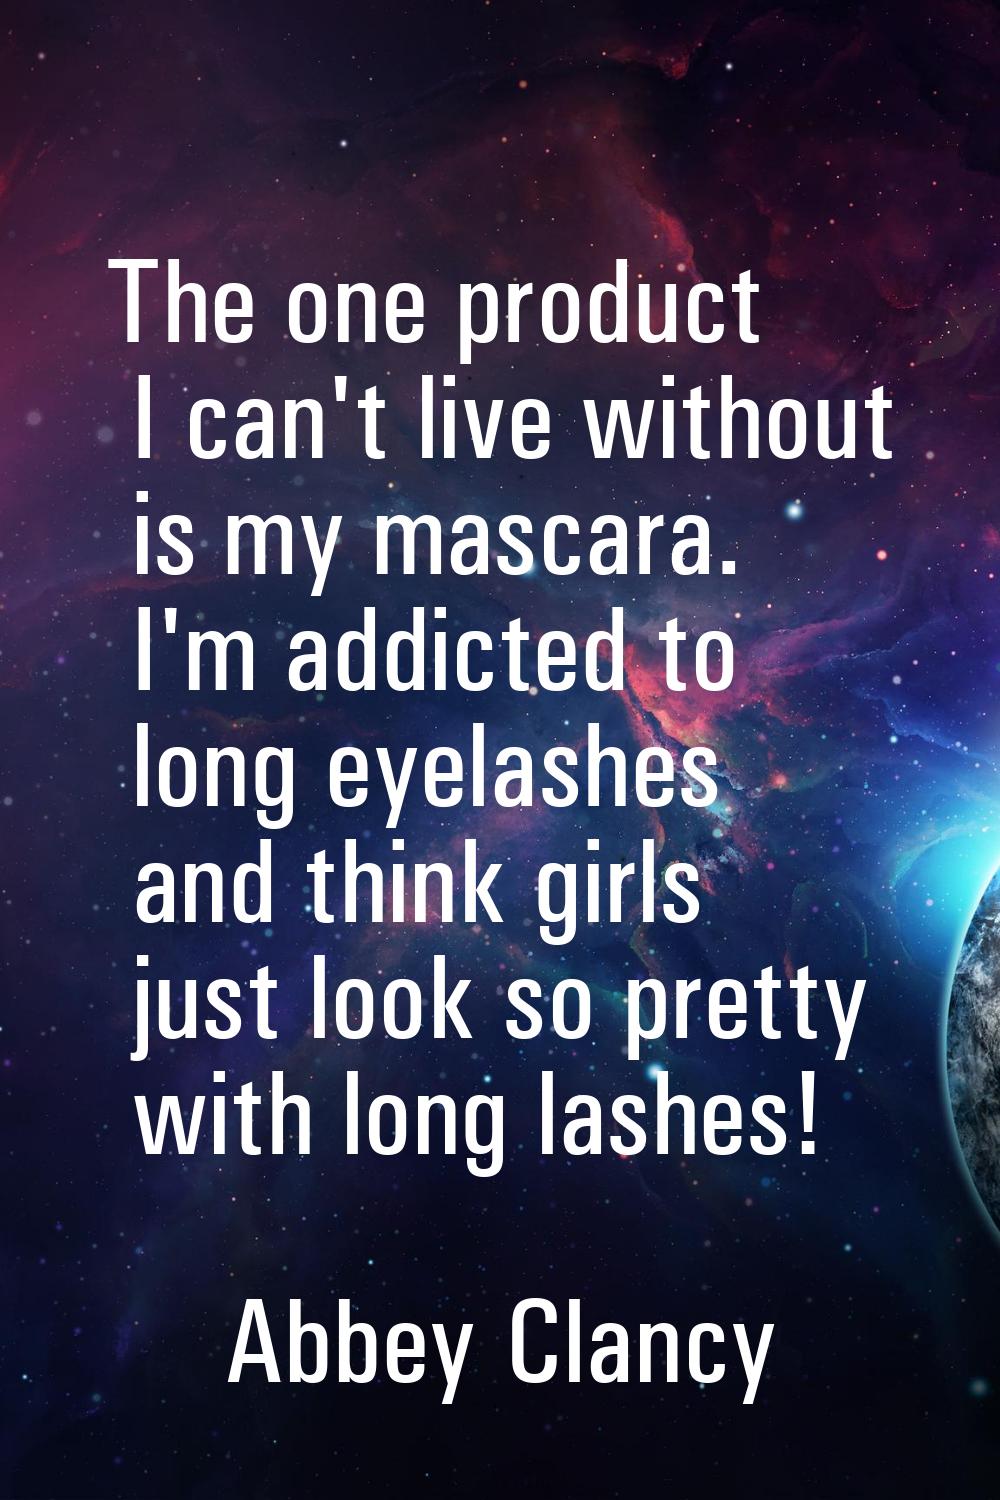 The one product I can't live without is my mascara. I'm addicted to long eyelashes and think girls 